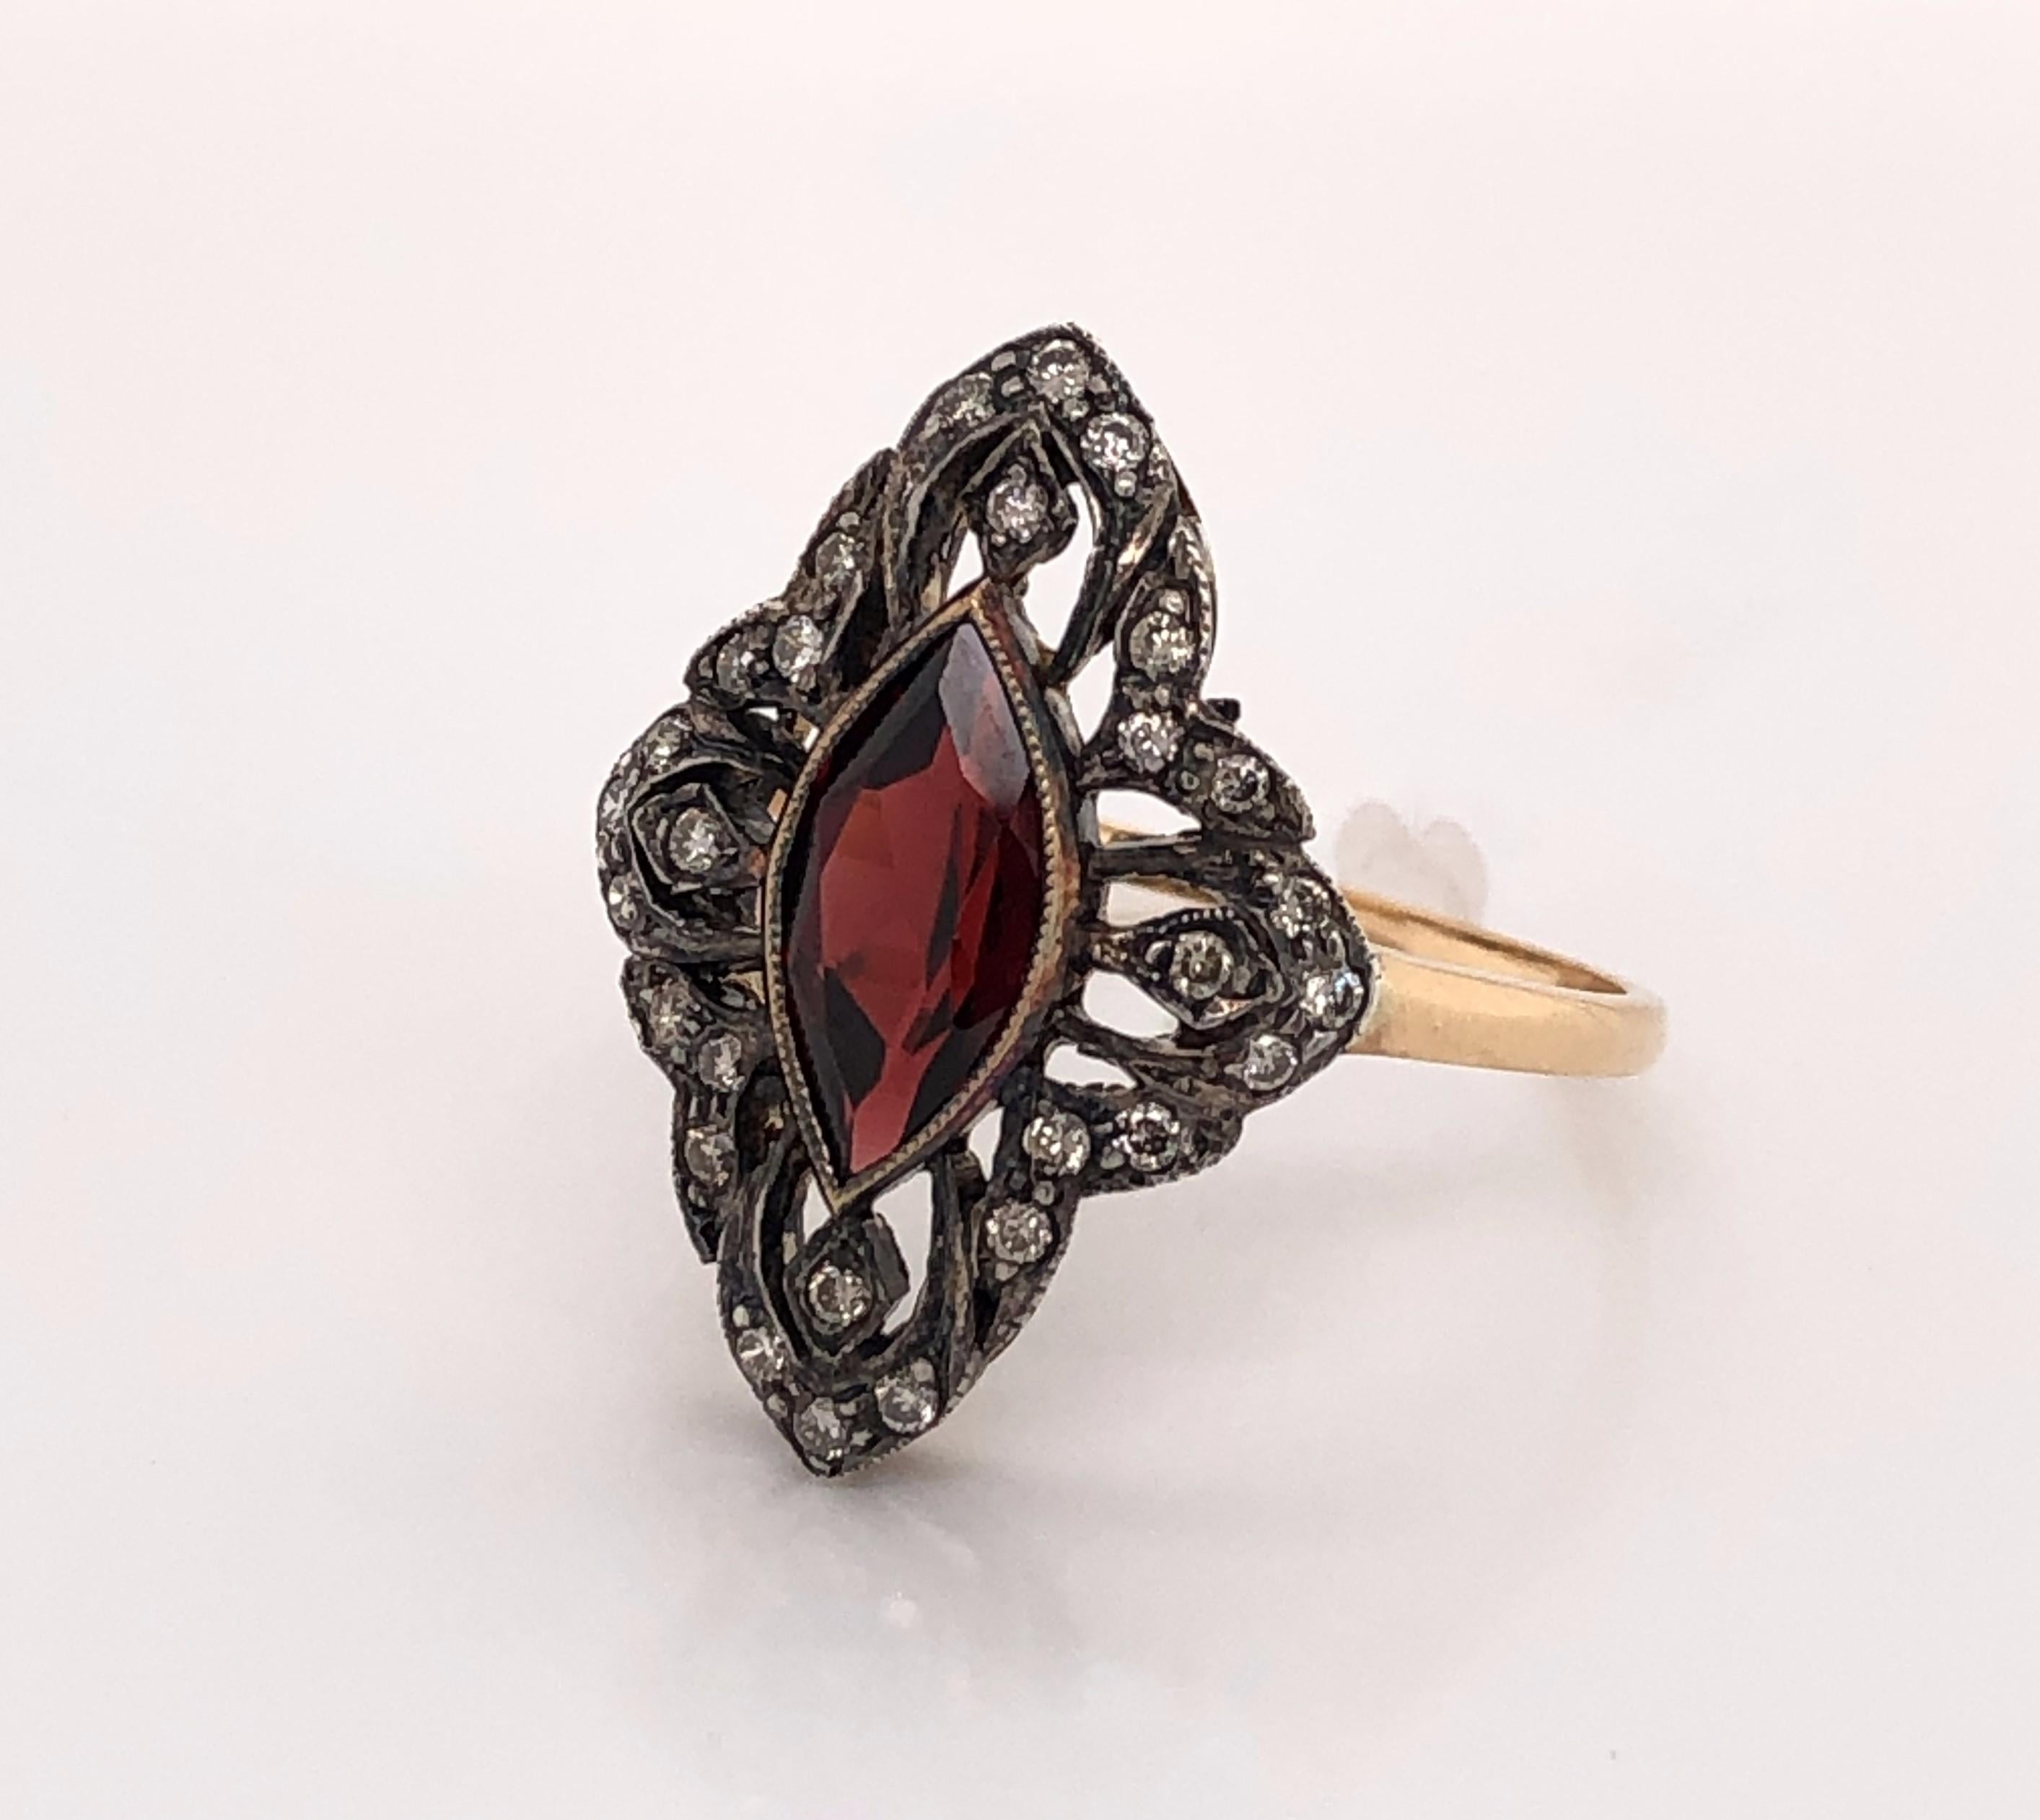 A beautiful rich red marquis cut garnet gemstone is the focal point of this elegant ladies antique ring. Rose cut diamonds adorn the lacy filigree in eighteen karat (18K) rose gold and create an ornate frame around the center stone. In size 7.5. In